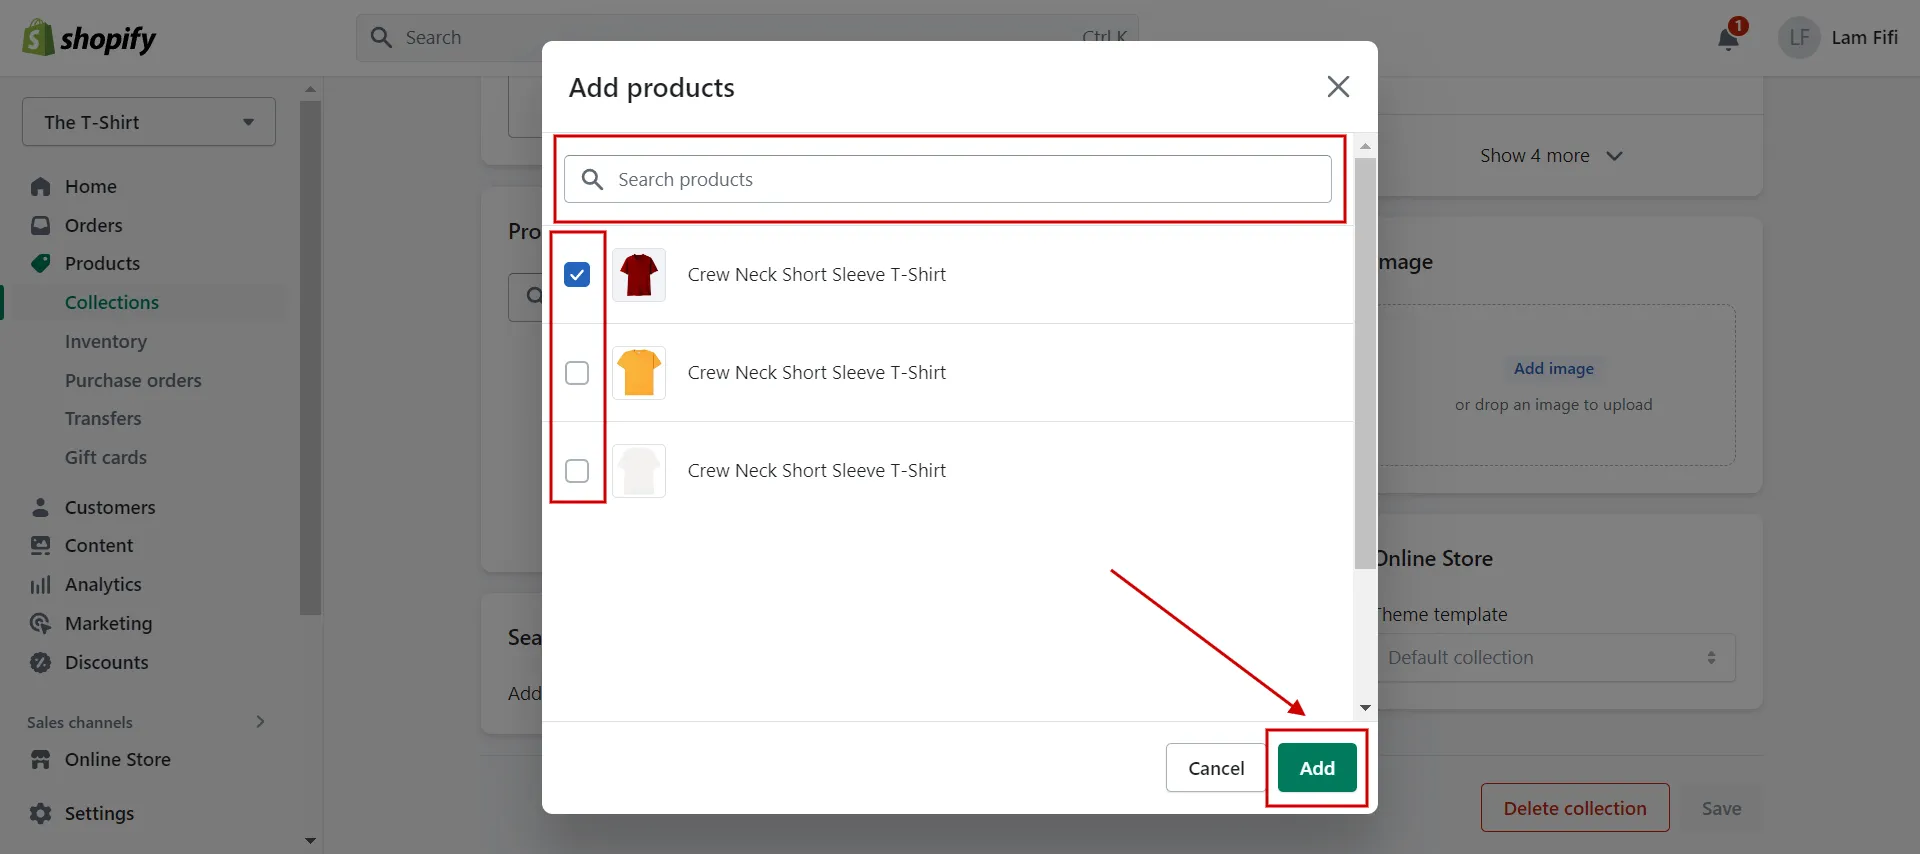 How to manually sort products in shopify